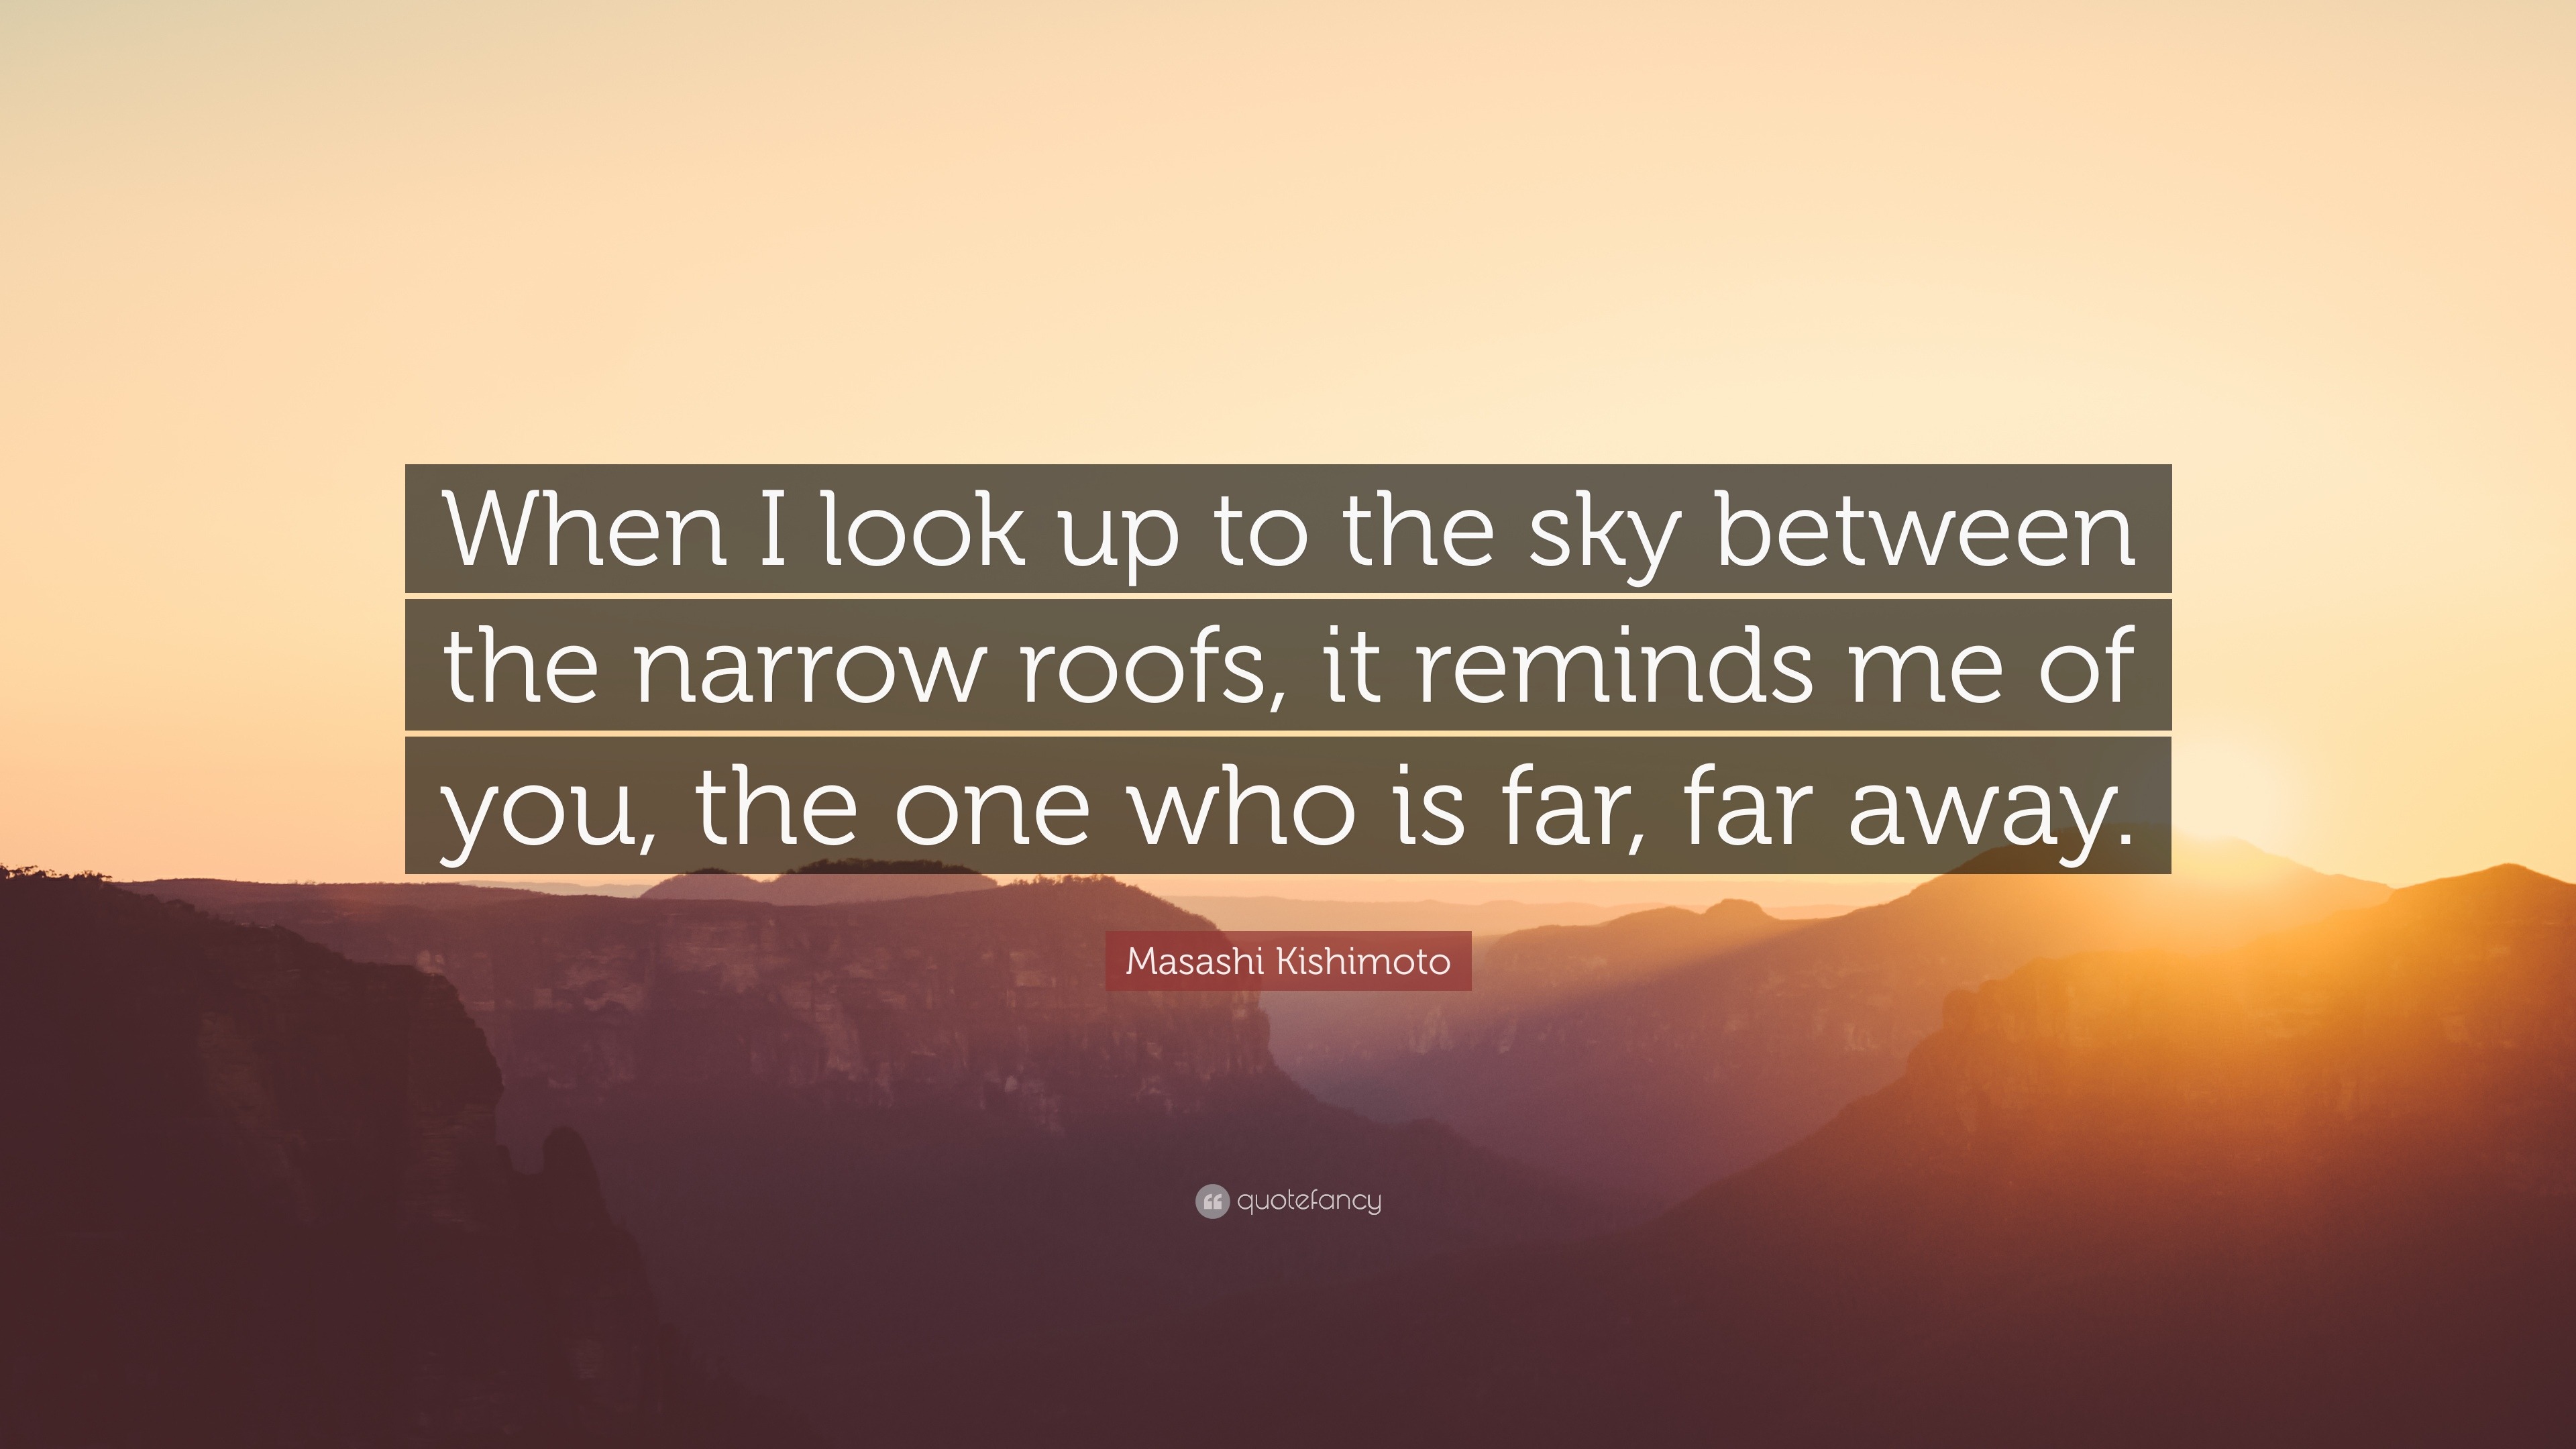 Masashi Kishimoto Quote When I Look Up To The Sky Between The Narrow Roofs It Reminds